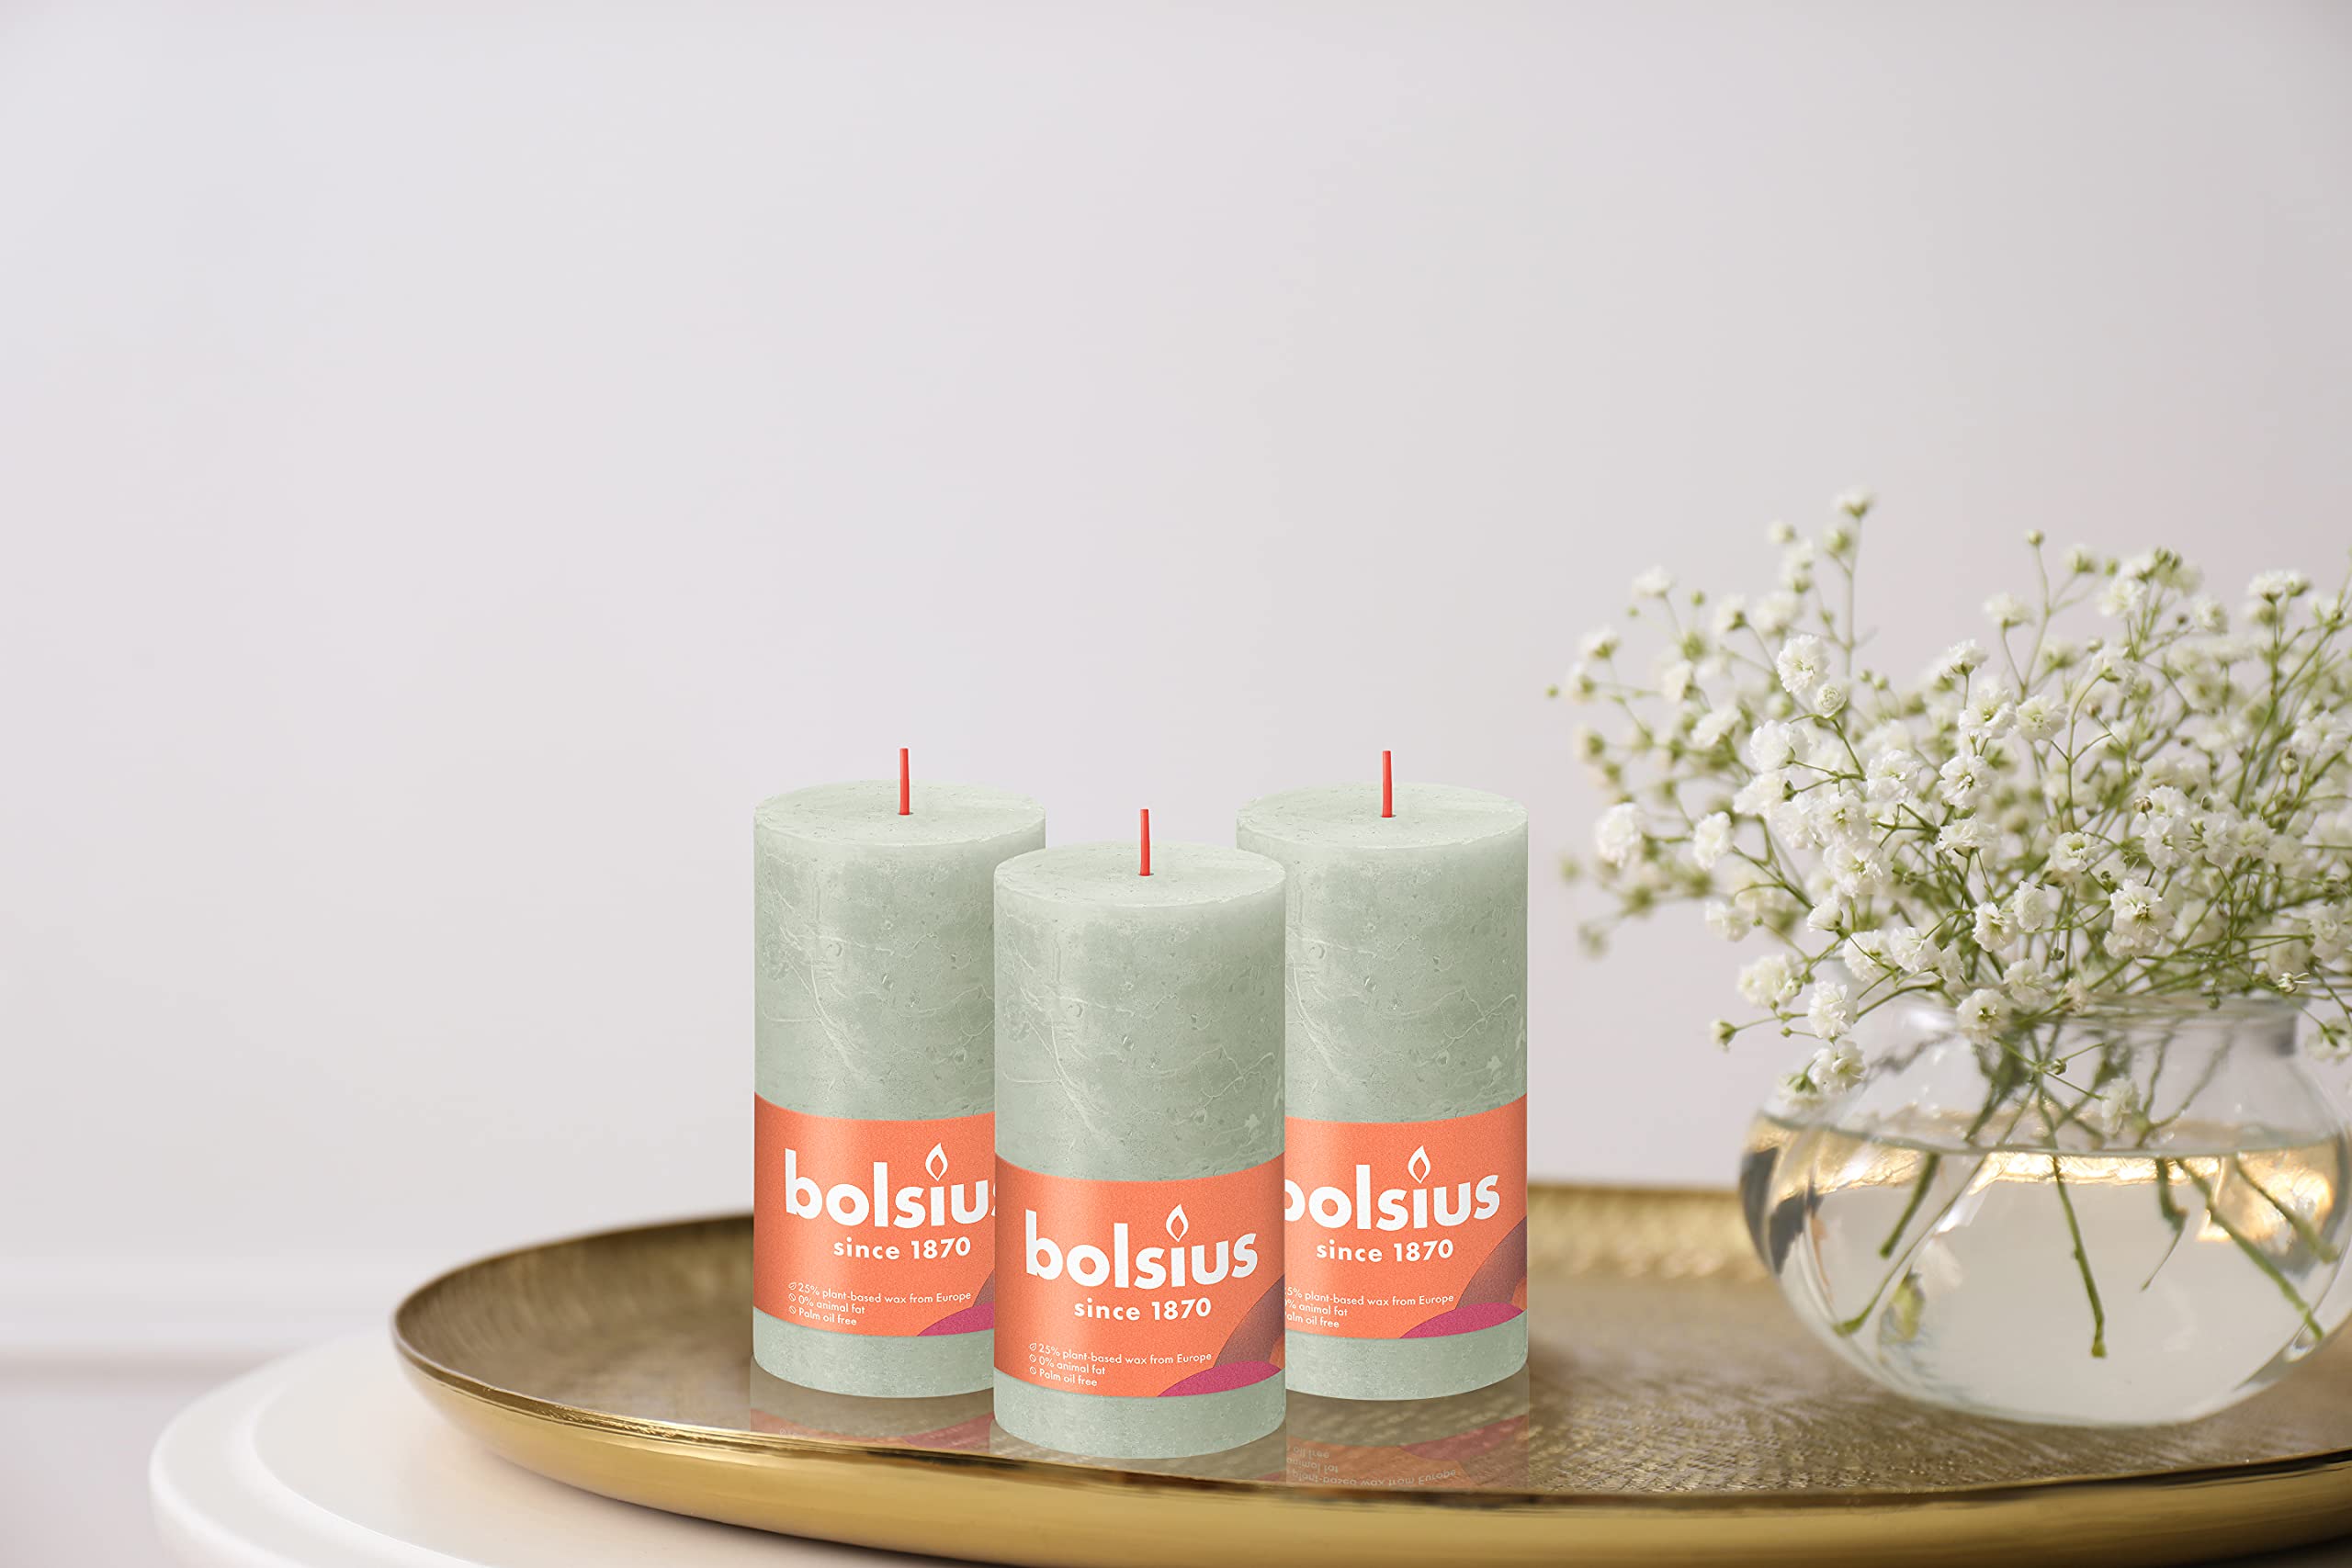 BOLSIUS 4 Pack Foggy Green Rustic Pillar Candles - 2 X 4 Inches - Premium European Quality - Includes Natural Plant-Based Wax - Unscented Dripless Smokeless 30 Hour Party and Wedding Candles  - Very Good